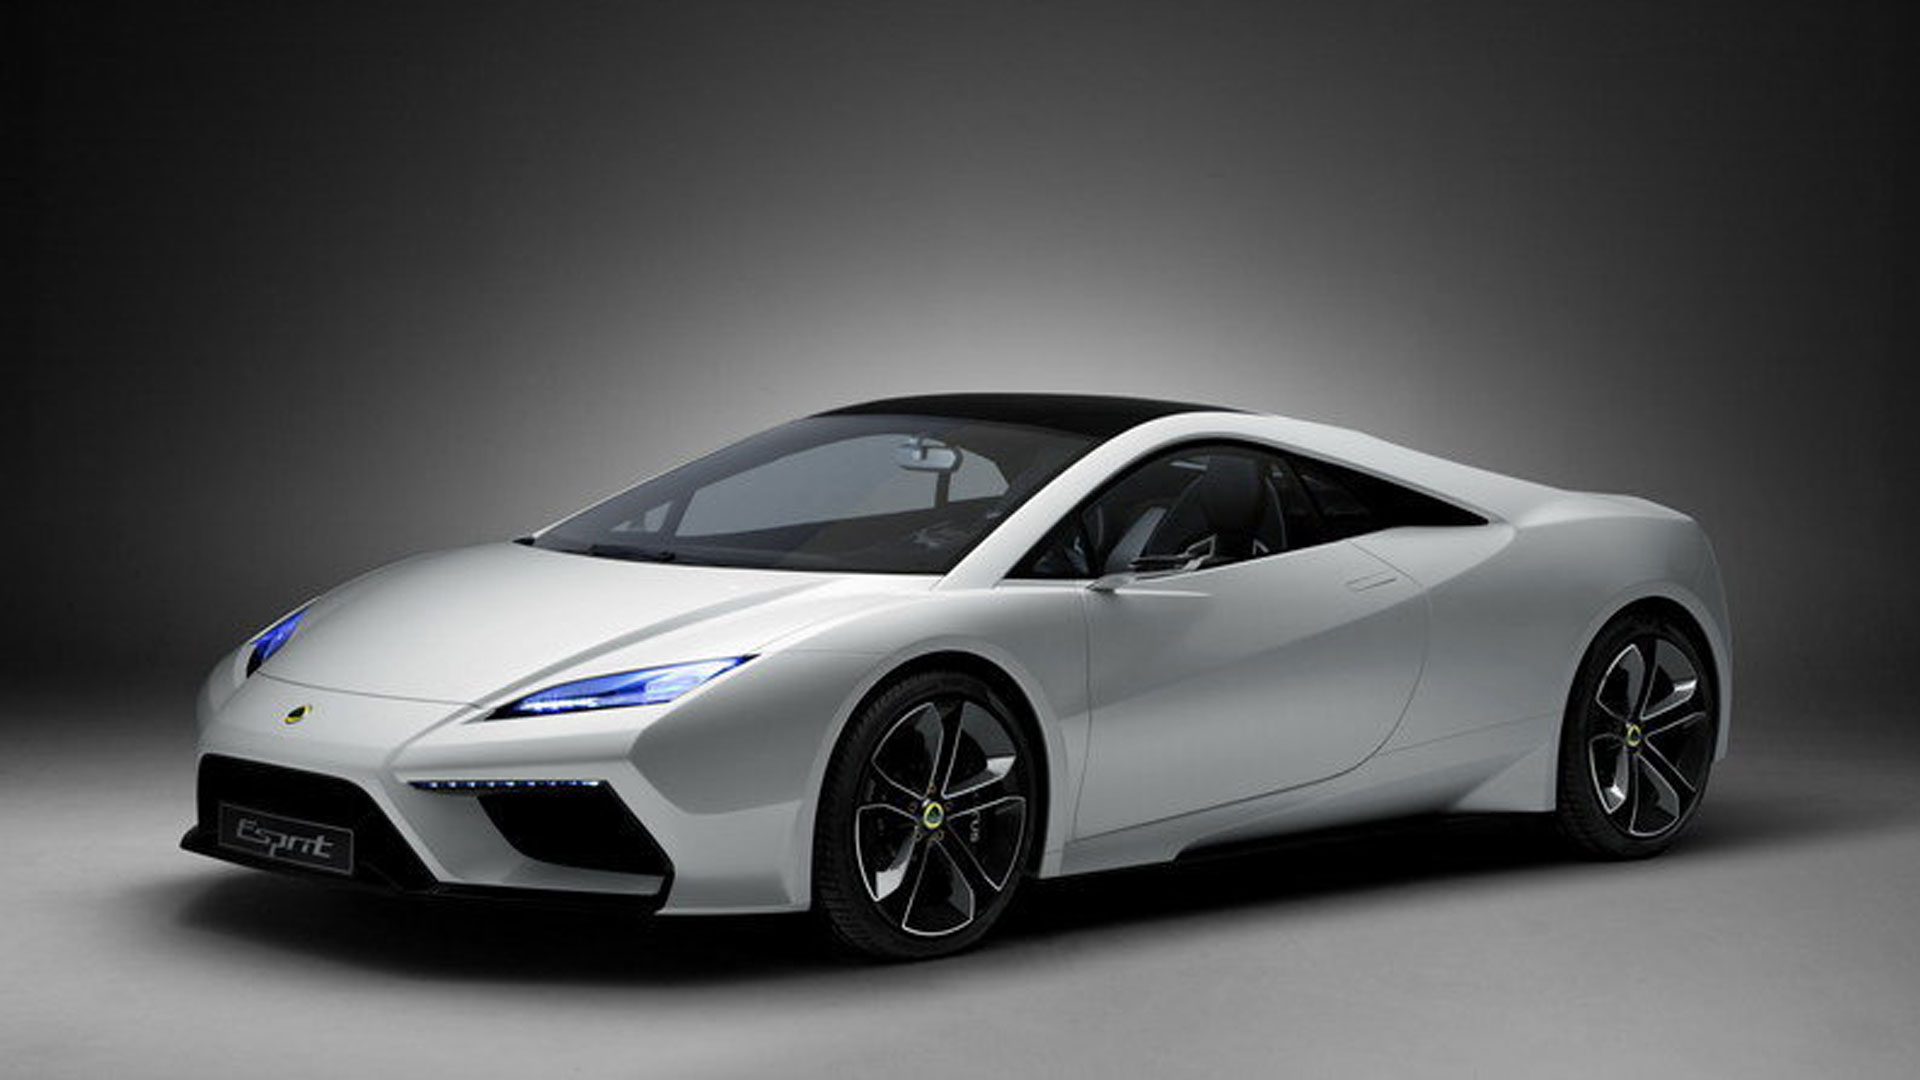 Lotus Esprit White Image And Wallpaper New Re